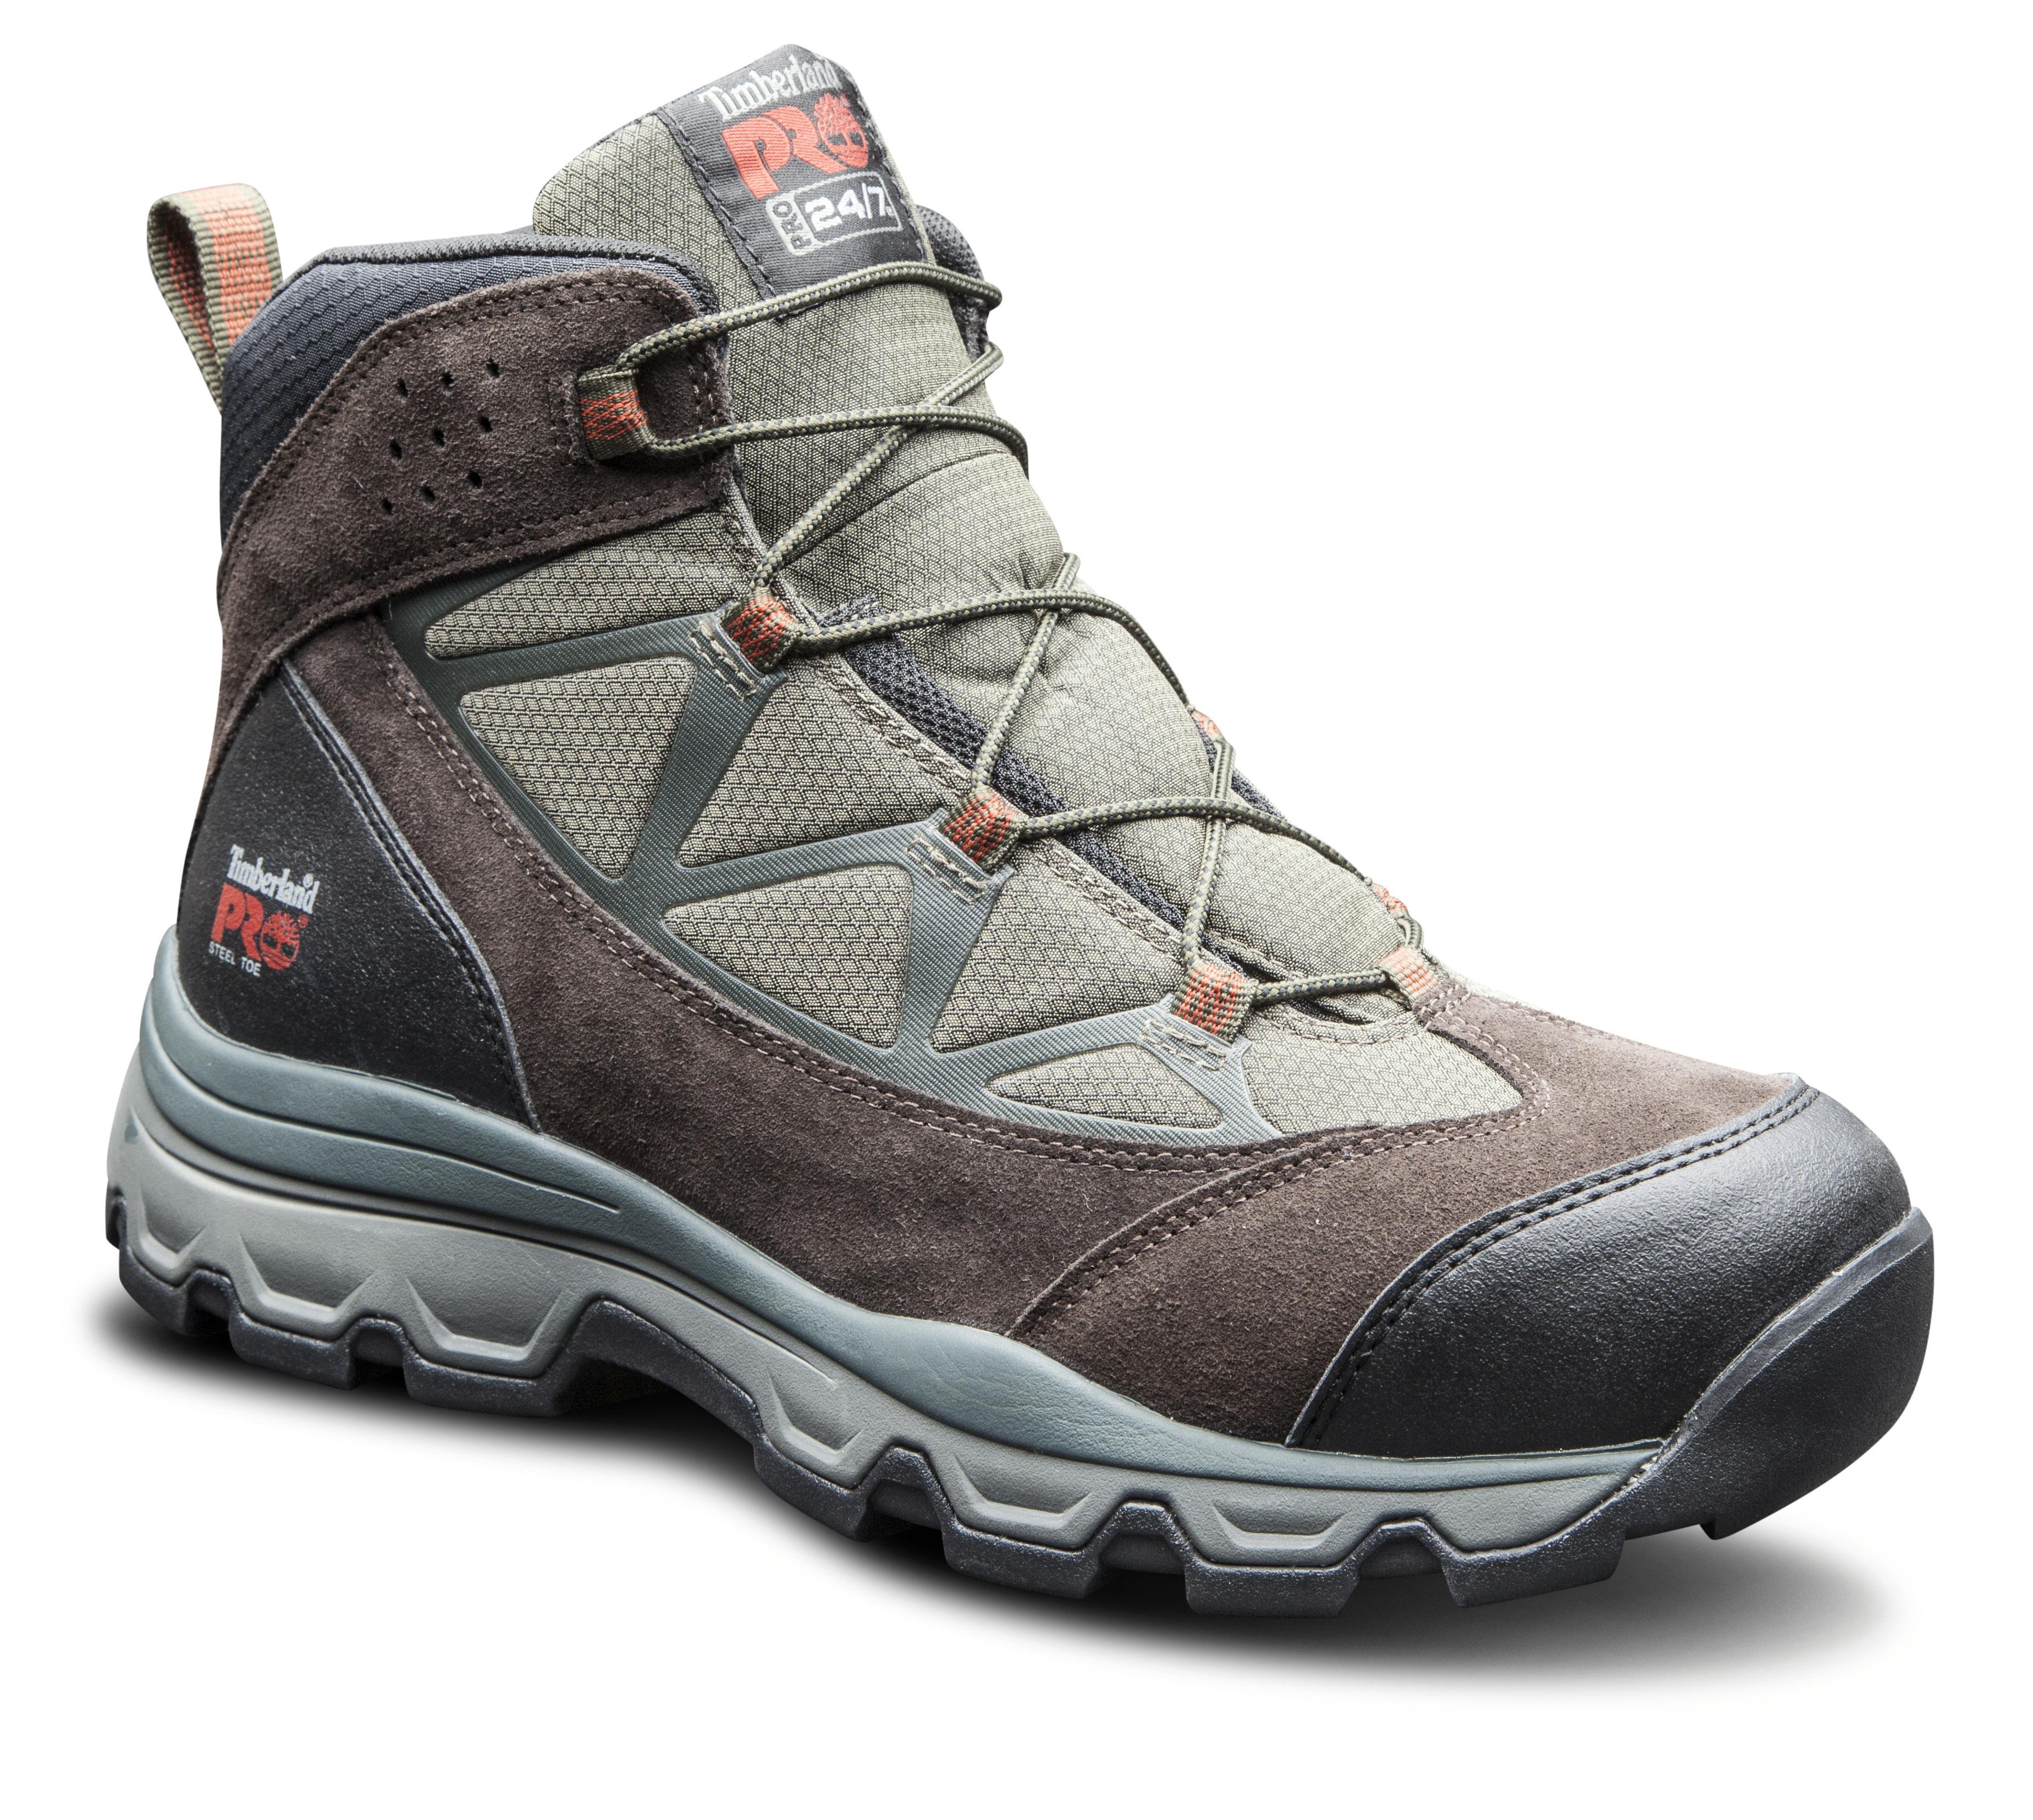 Timberland PRO Men's Rockscape Brown/Gray Steel Toe Work Boot - Wide Width Available